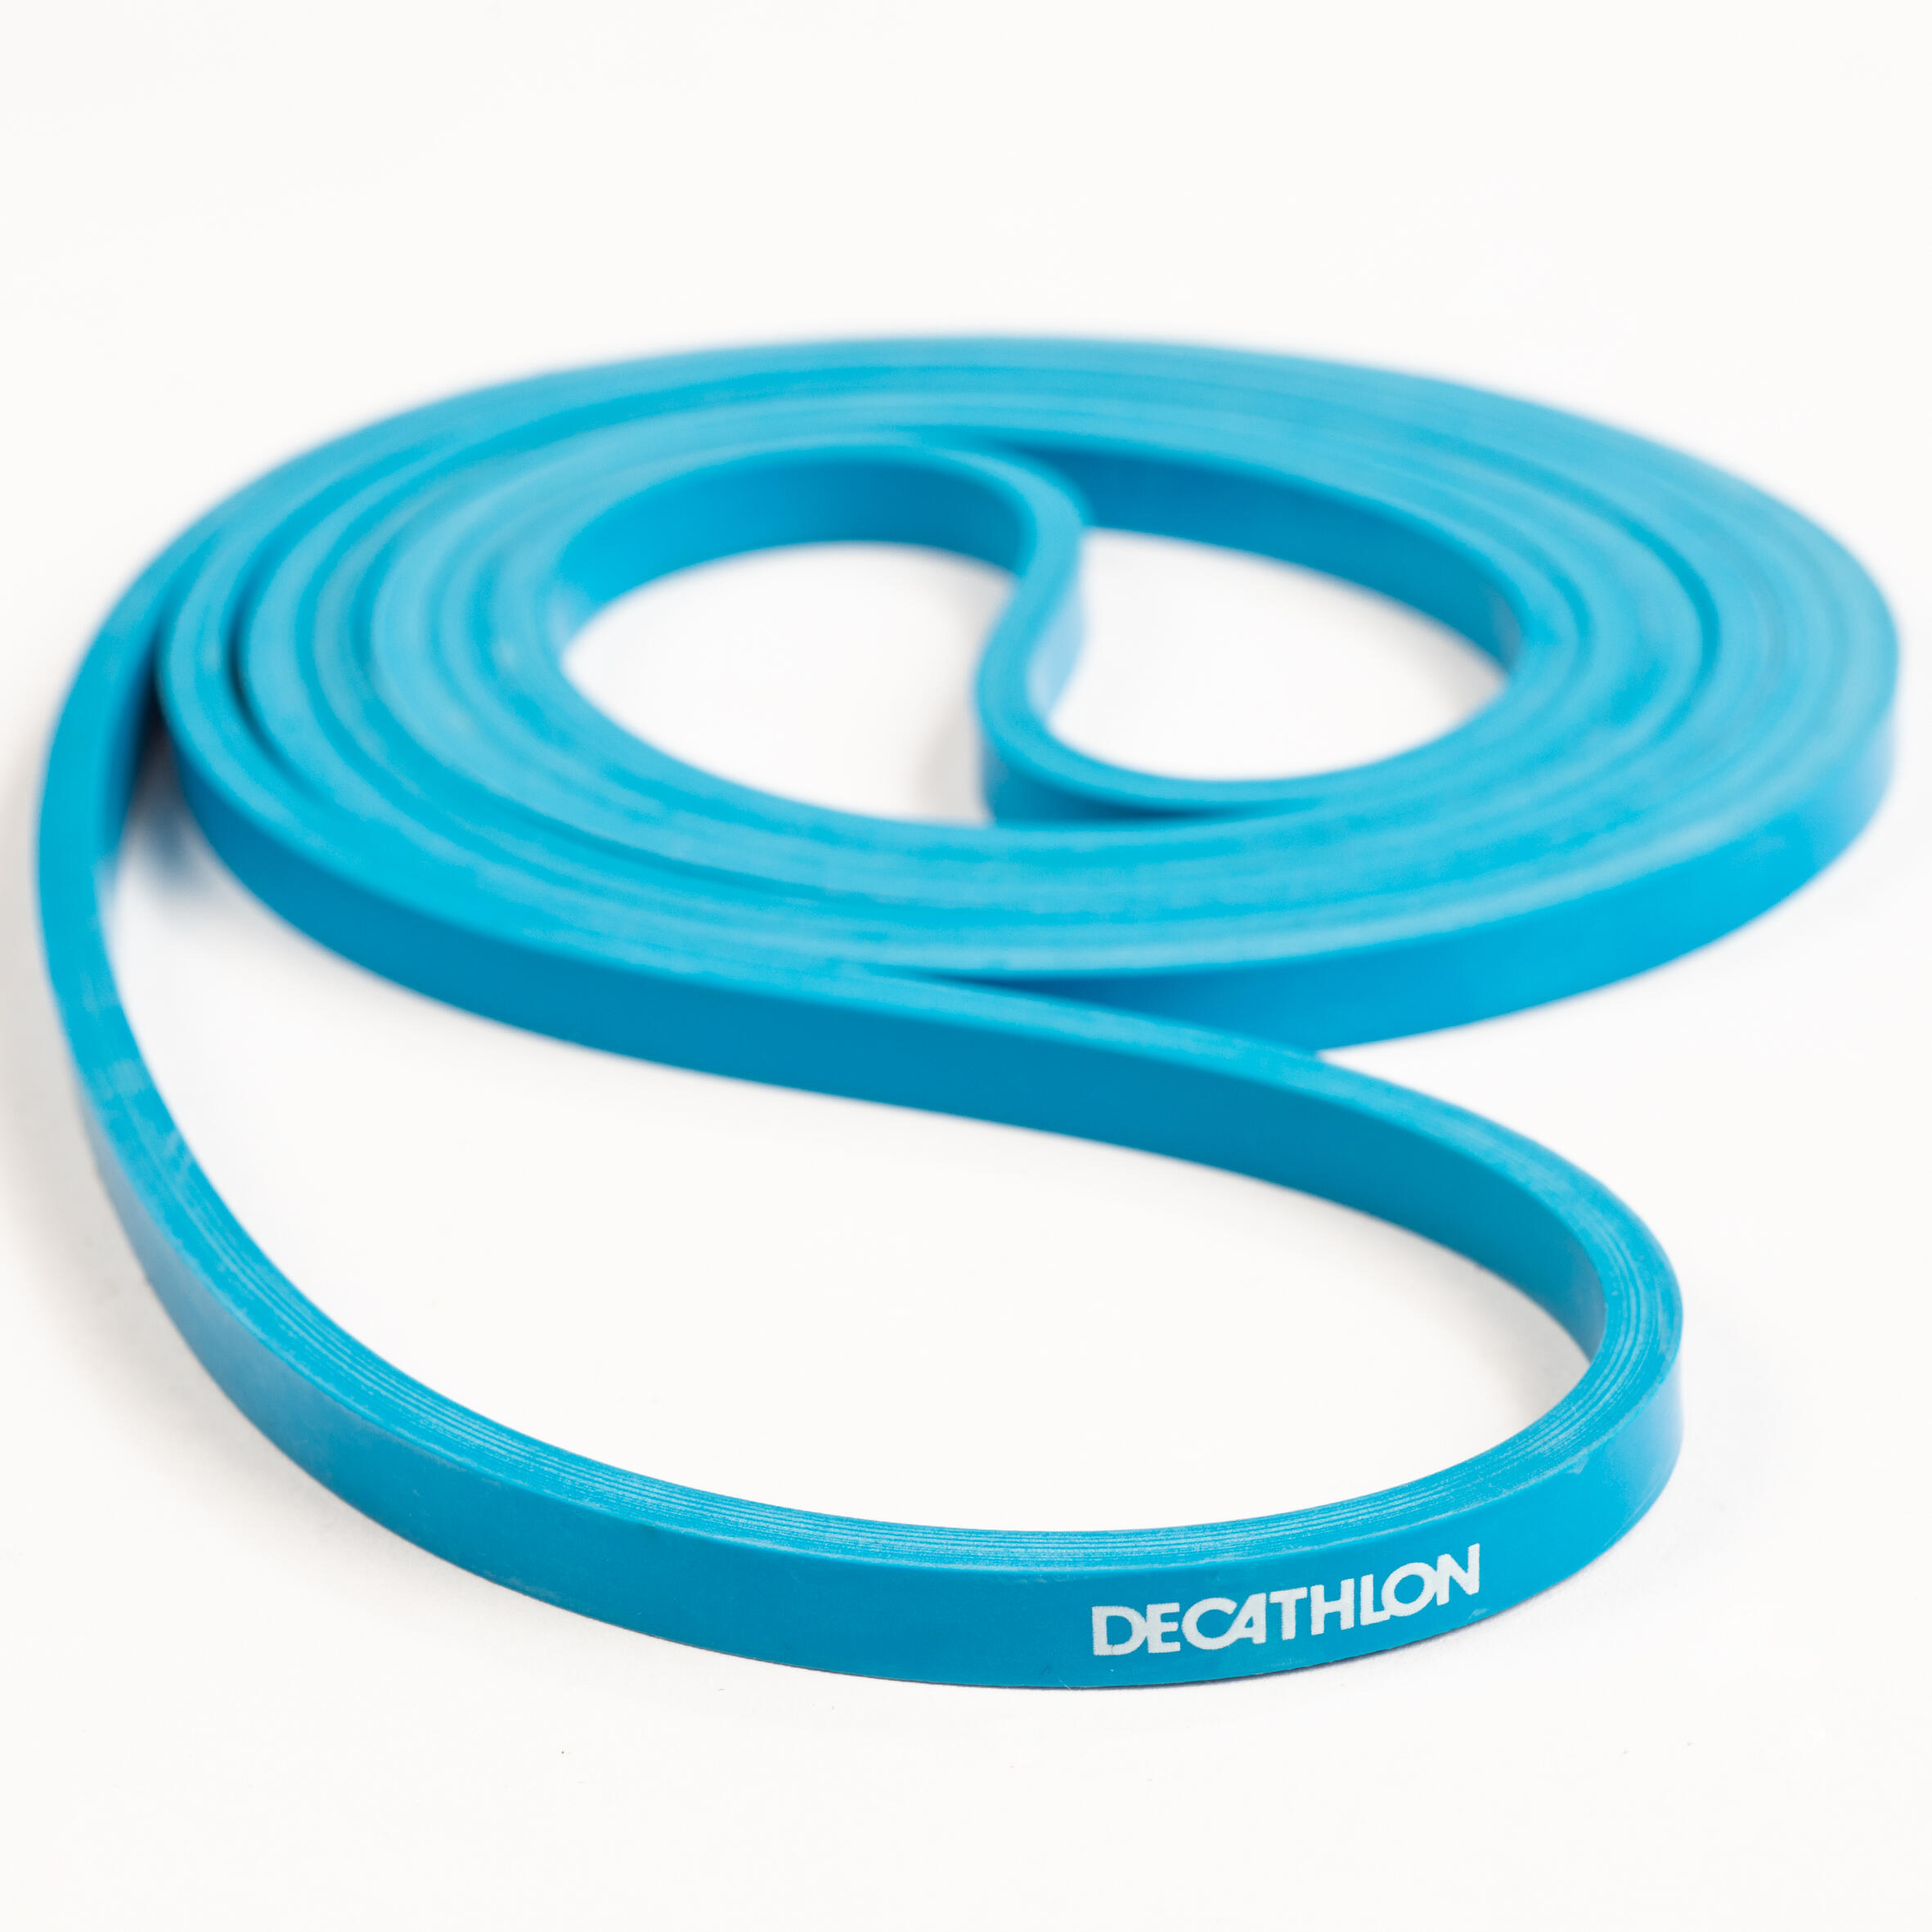 resistance bands decathlon india